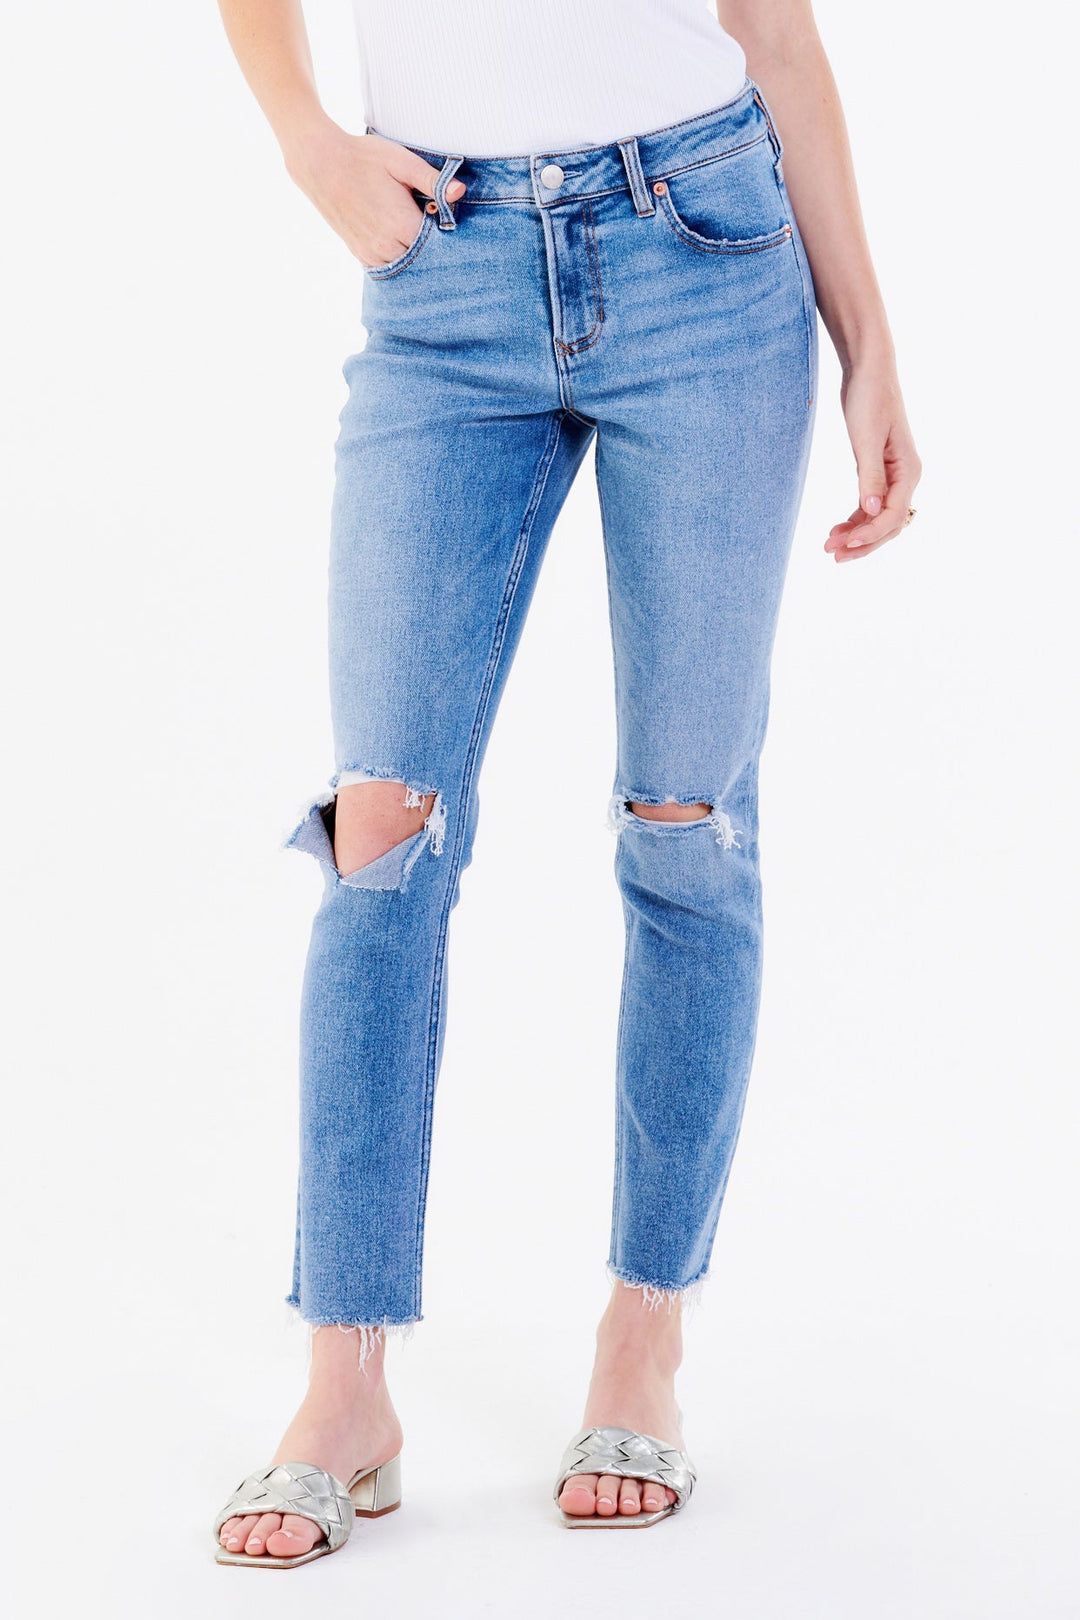 image of a female model wearing a AIDEN HIGH RISE GIRLFRIEND JEANS SUMMIT JEANS